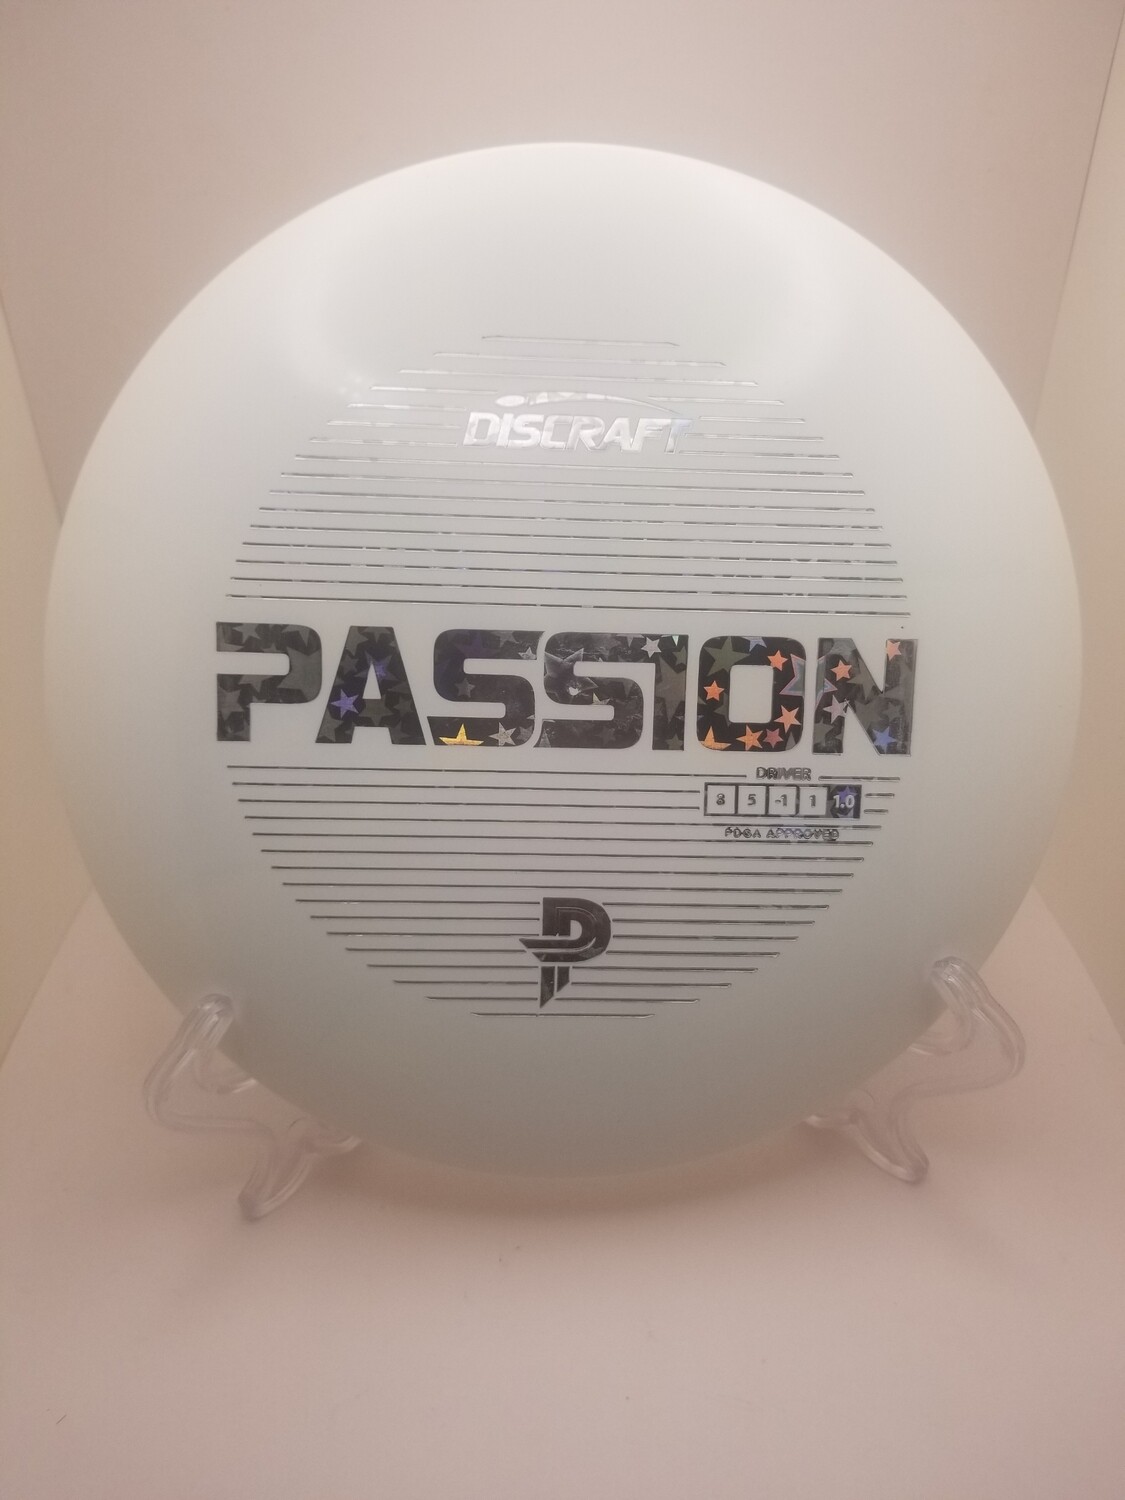 Discraft Discs Paige Pierce Passion White with Silver Star Stamp 160-163g